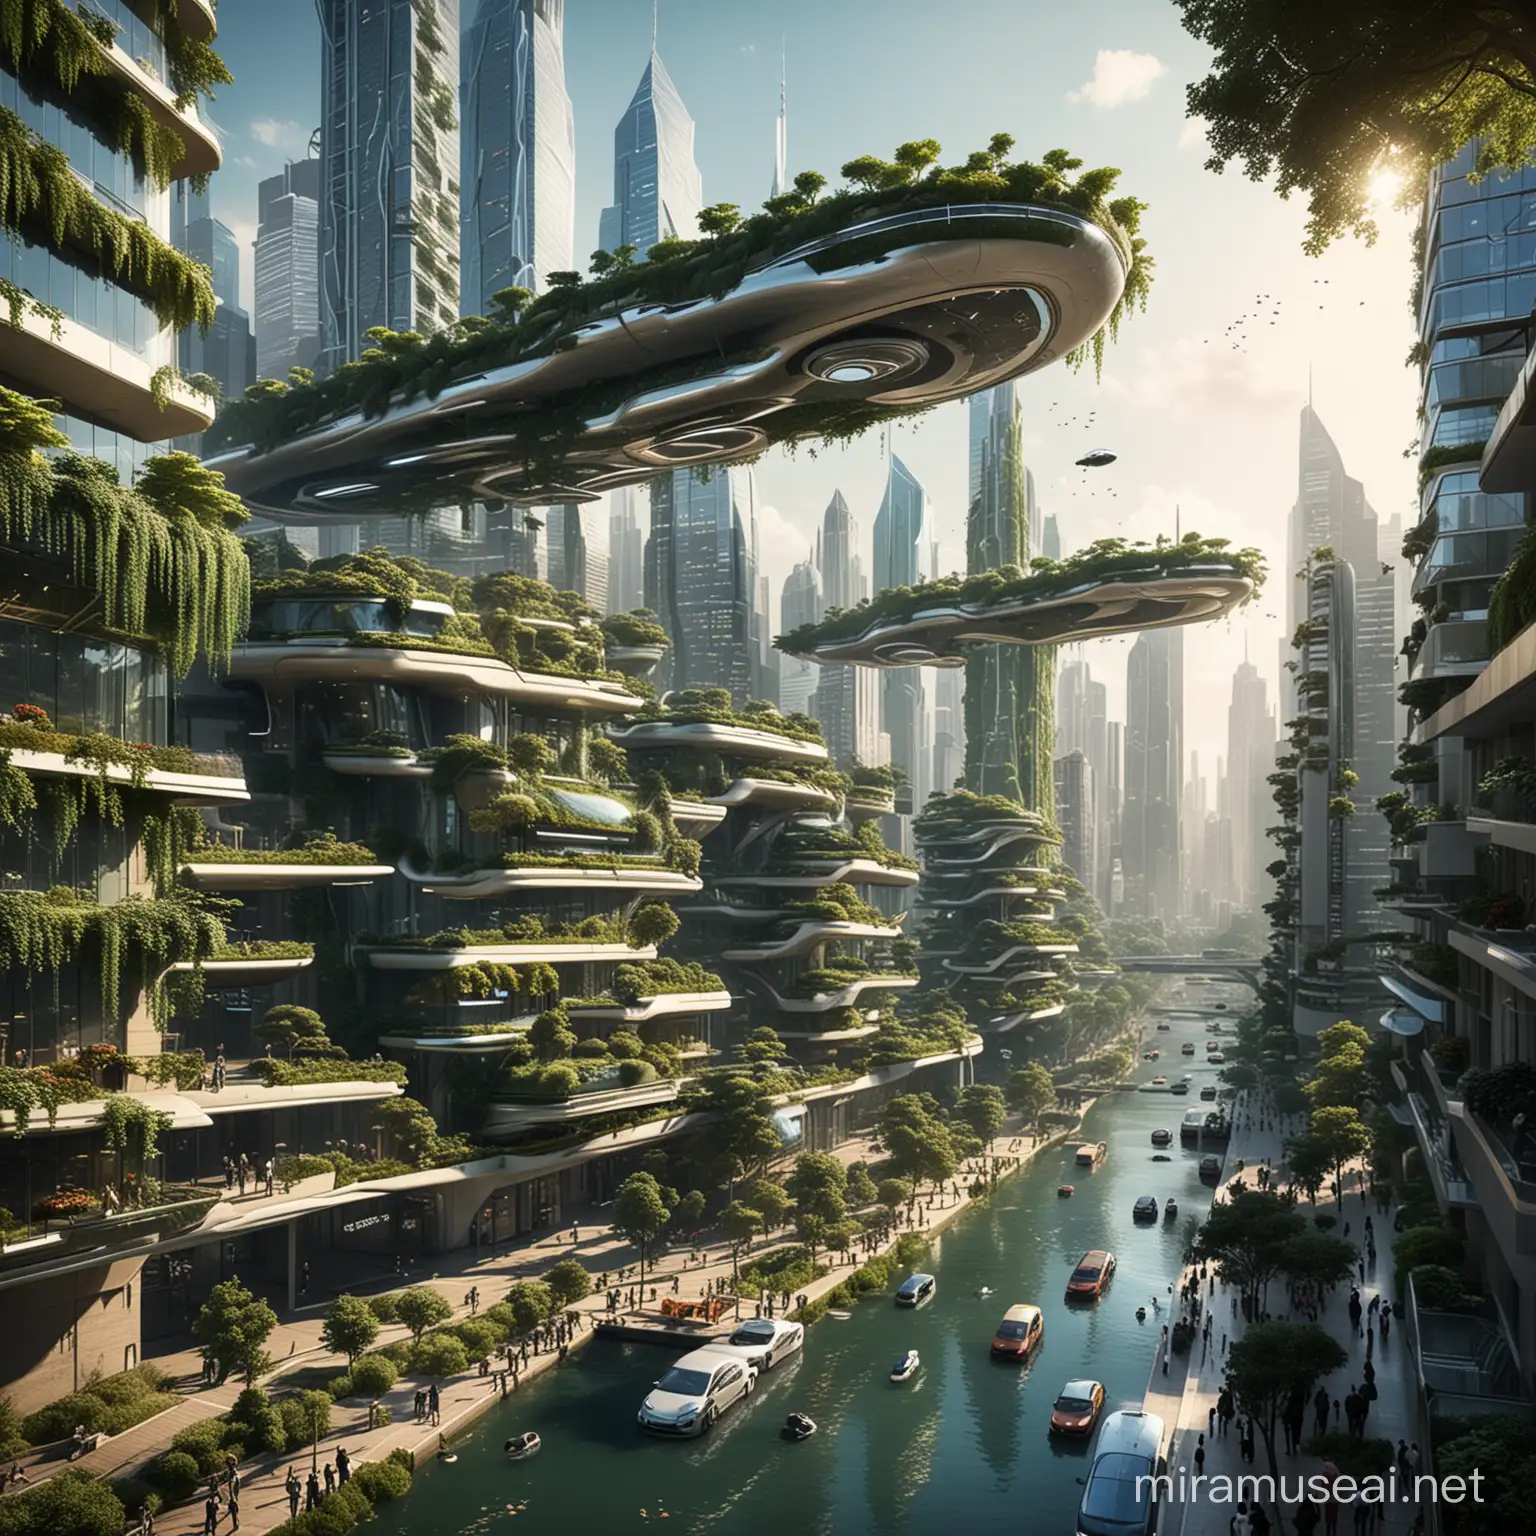 The image depicts a futuristic cityscape, bustling with activity and towering skyscrapers that gleam with advanced technology. The streets below are sleek and well-organized, filled with hovercars and pedestrians moving efficiently from one place to another.

Instead of traditional trees lining the streets or in parks, the city utilizes advanced anti-gravity technology to suspend lush greenery in the air. These hanging gardens float at various levels above the ground, creating a stunning visual display and providing a unique solution to urban greenery.

The trees are not confined to a single level; they extend vertically, forming intricate layers of foliage that weave through the airspace of the city. Each tree is equipped with specialized mechanisms that harness sunlight and convert carbon dioxide into oxygen, contributing to the city's clean and breathable atmosphere.

Despite the absence of trees on the ground, the cityscape feels vibrant and alive, with the floating gardens adding a touch of natural beauty to the futuristic skyline. It's a perfect example of how innovation and technology can coexist with nature, creating a sustainable and harmonious environment for future generations.